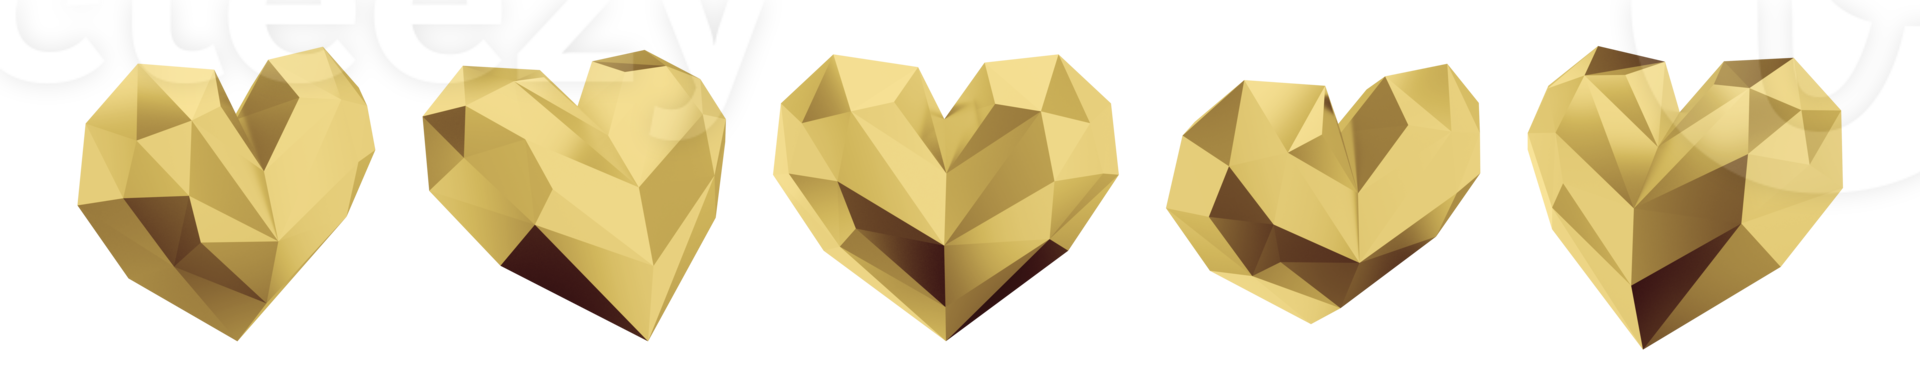 Set of gold low poly hearts. Views from different sides. 3D rendering. Symbol of love, likes, romance. PNG icon on transparent background.